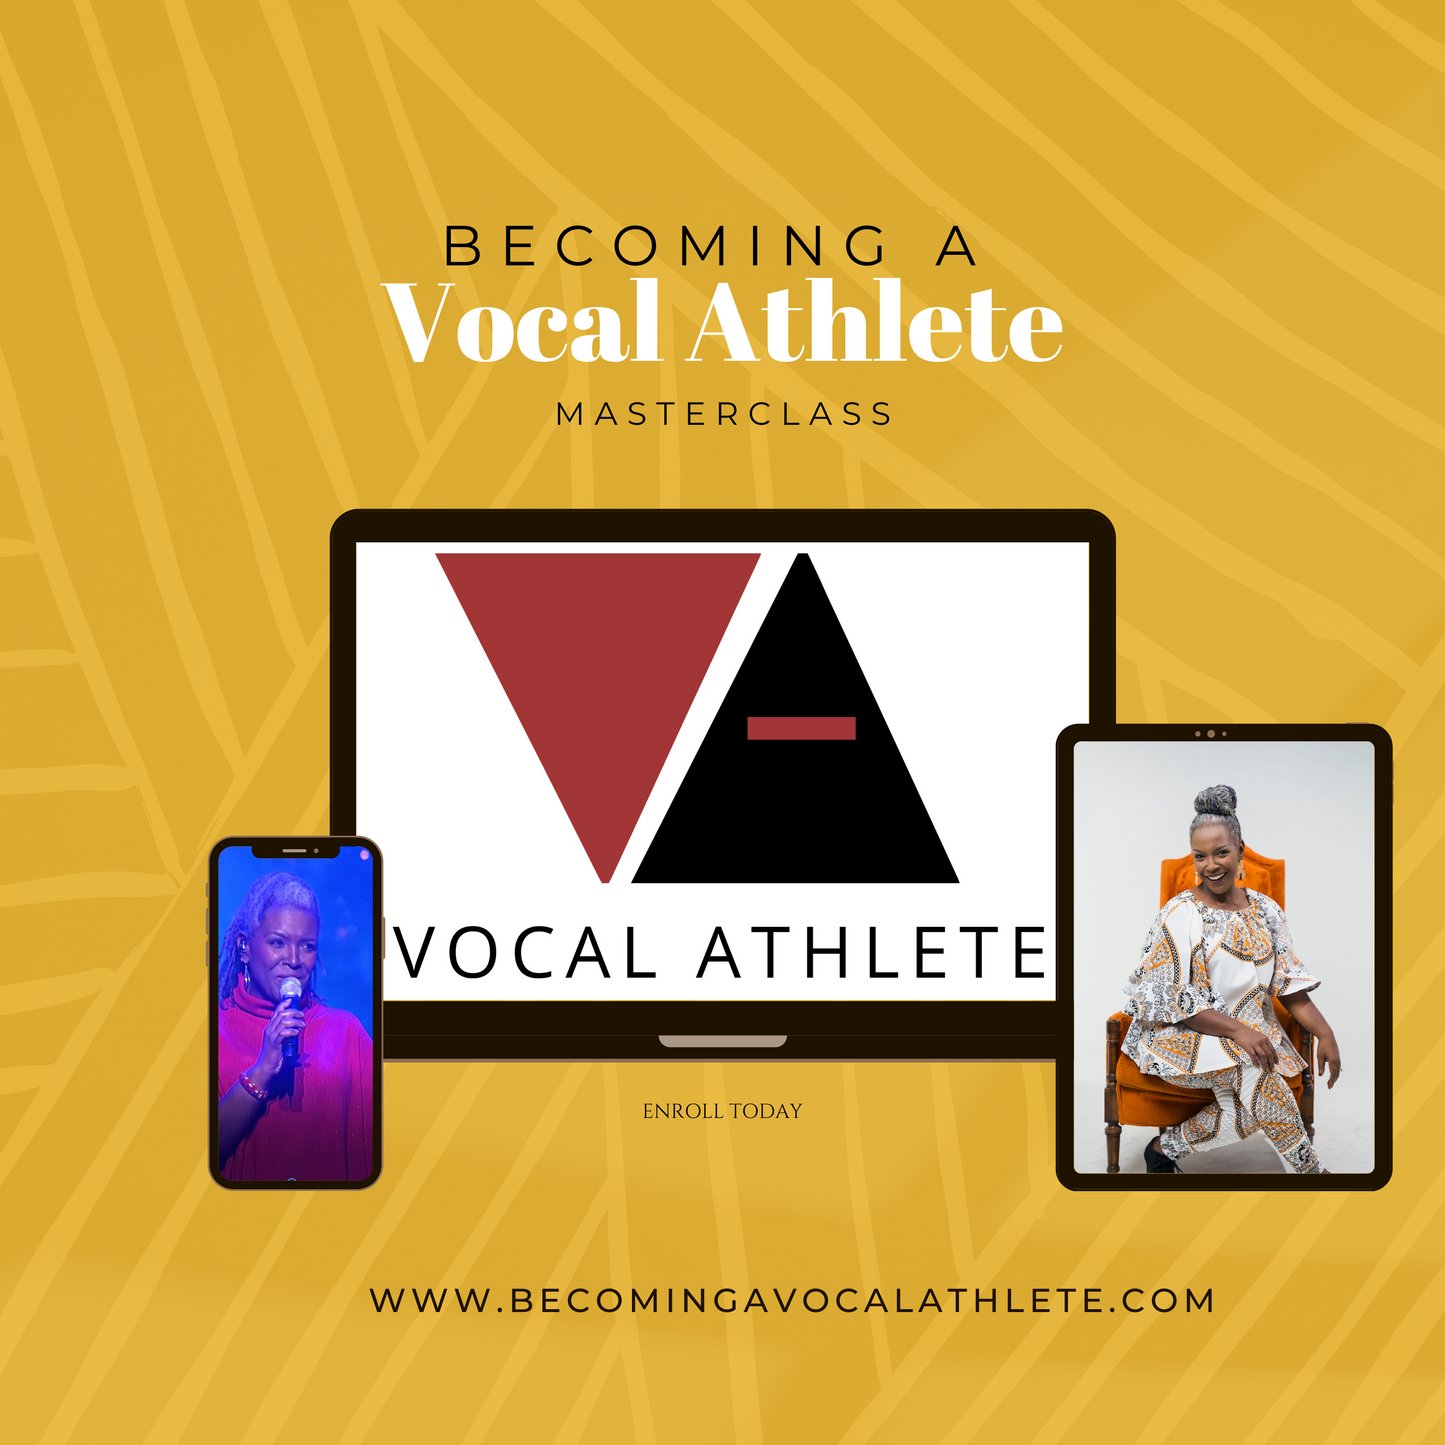 Becoming a Vocal Athlete - Masterclass